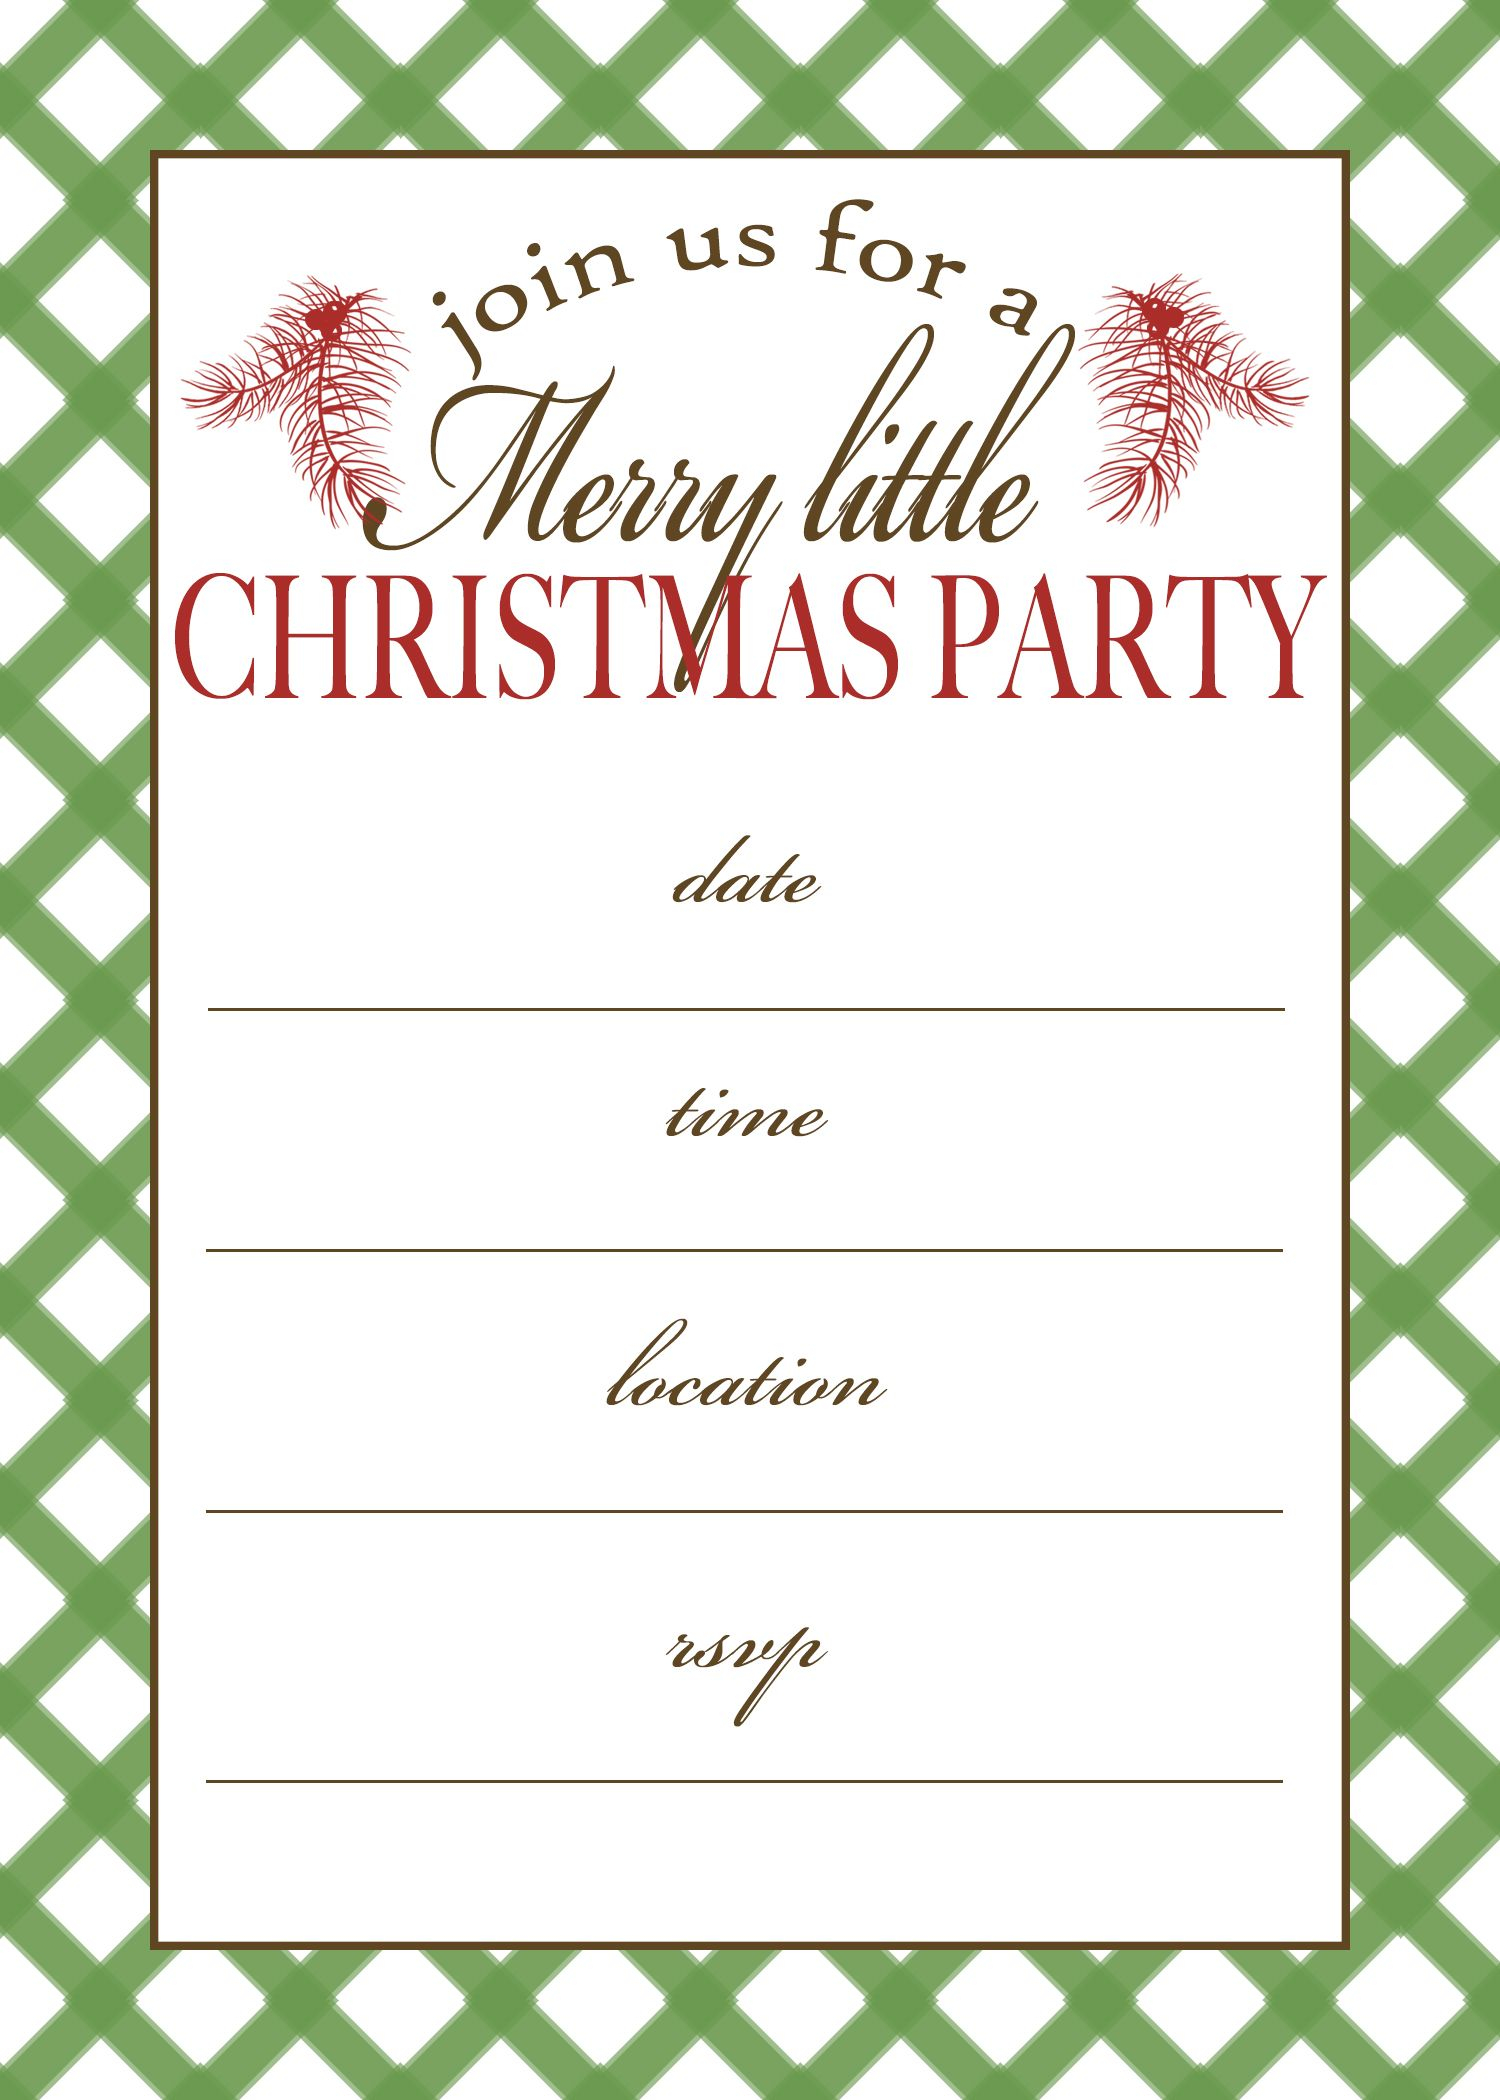 Free Printable Christmas Party Invitation Crafts Free Christmas inside measurements 1500 X 2100